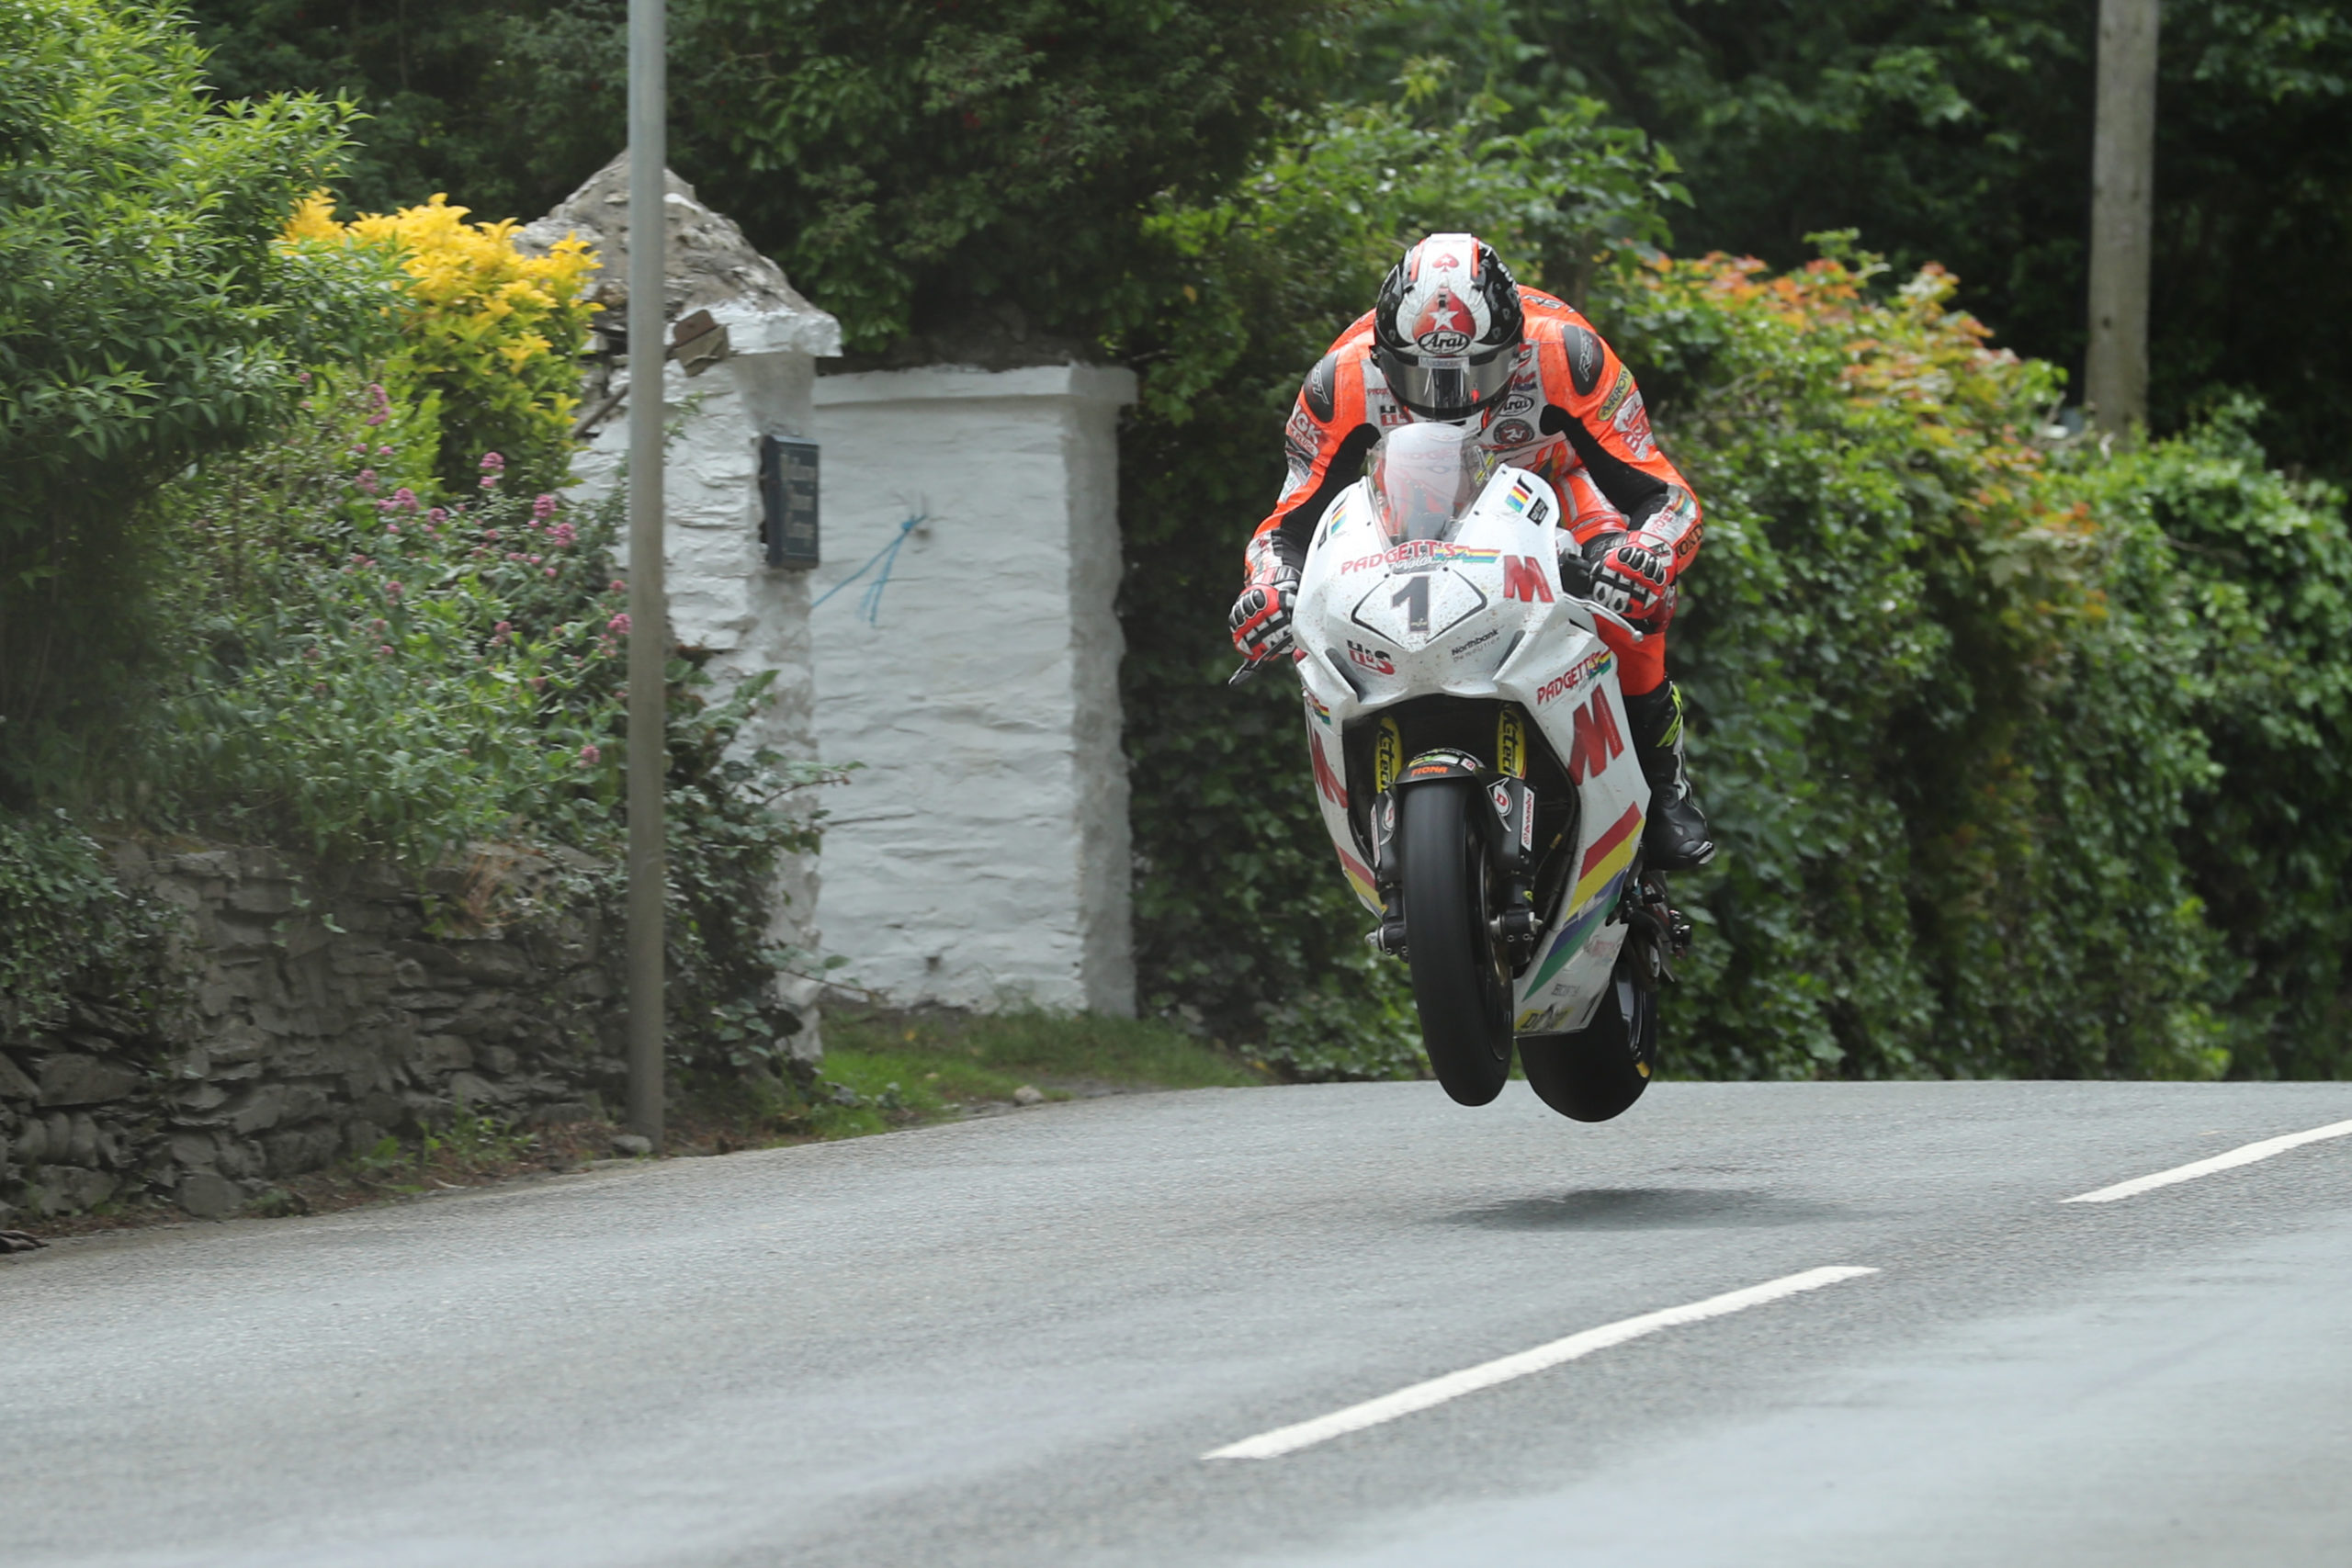 Conor Cummins on his Honda at Ballacrye during the RST Superbike TT race. 